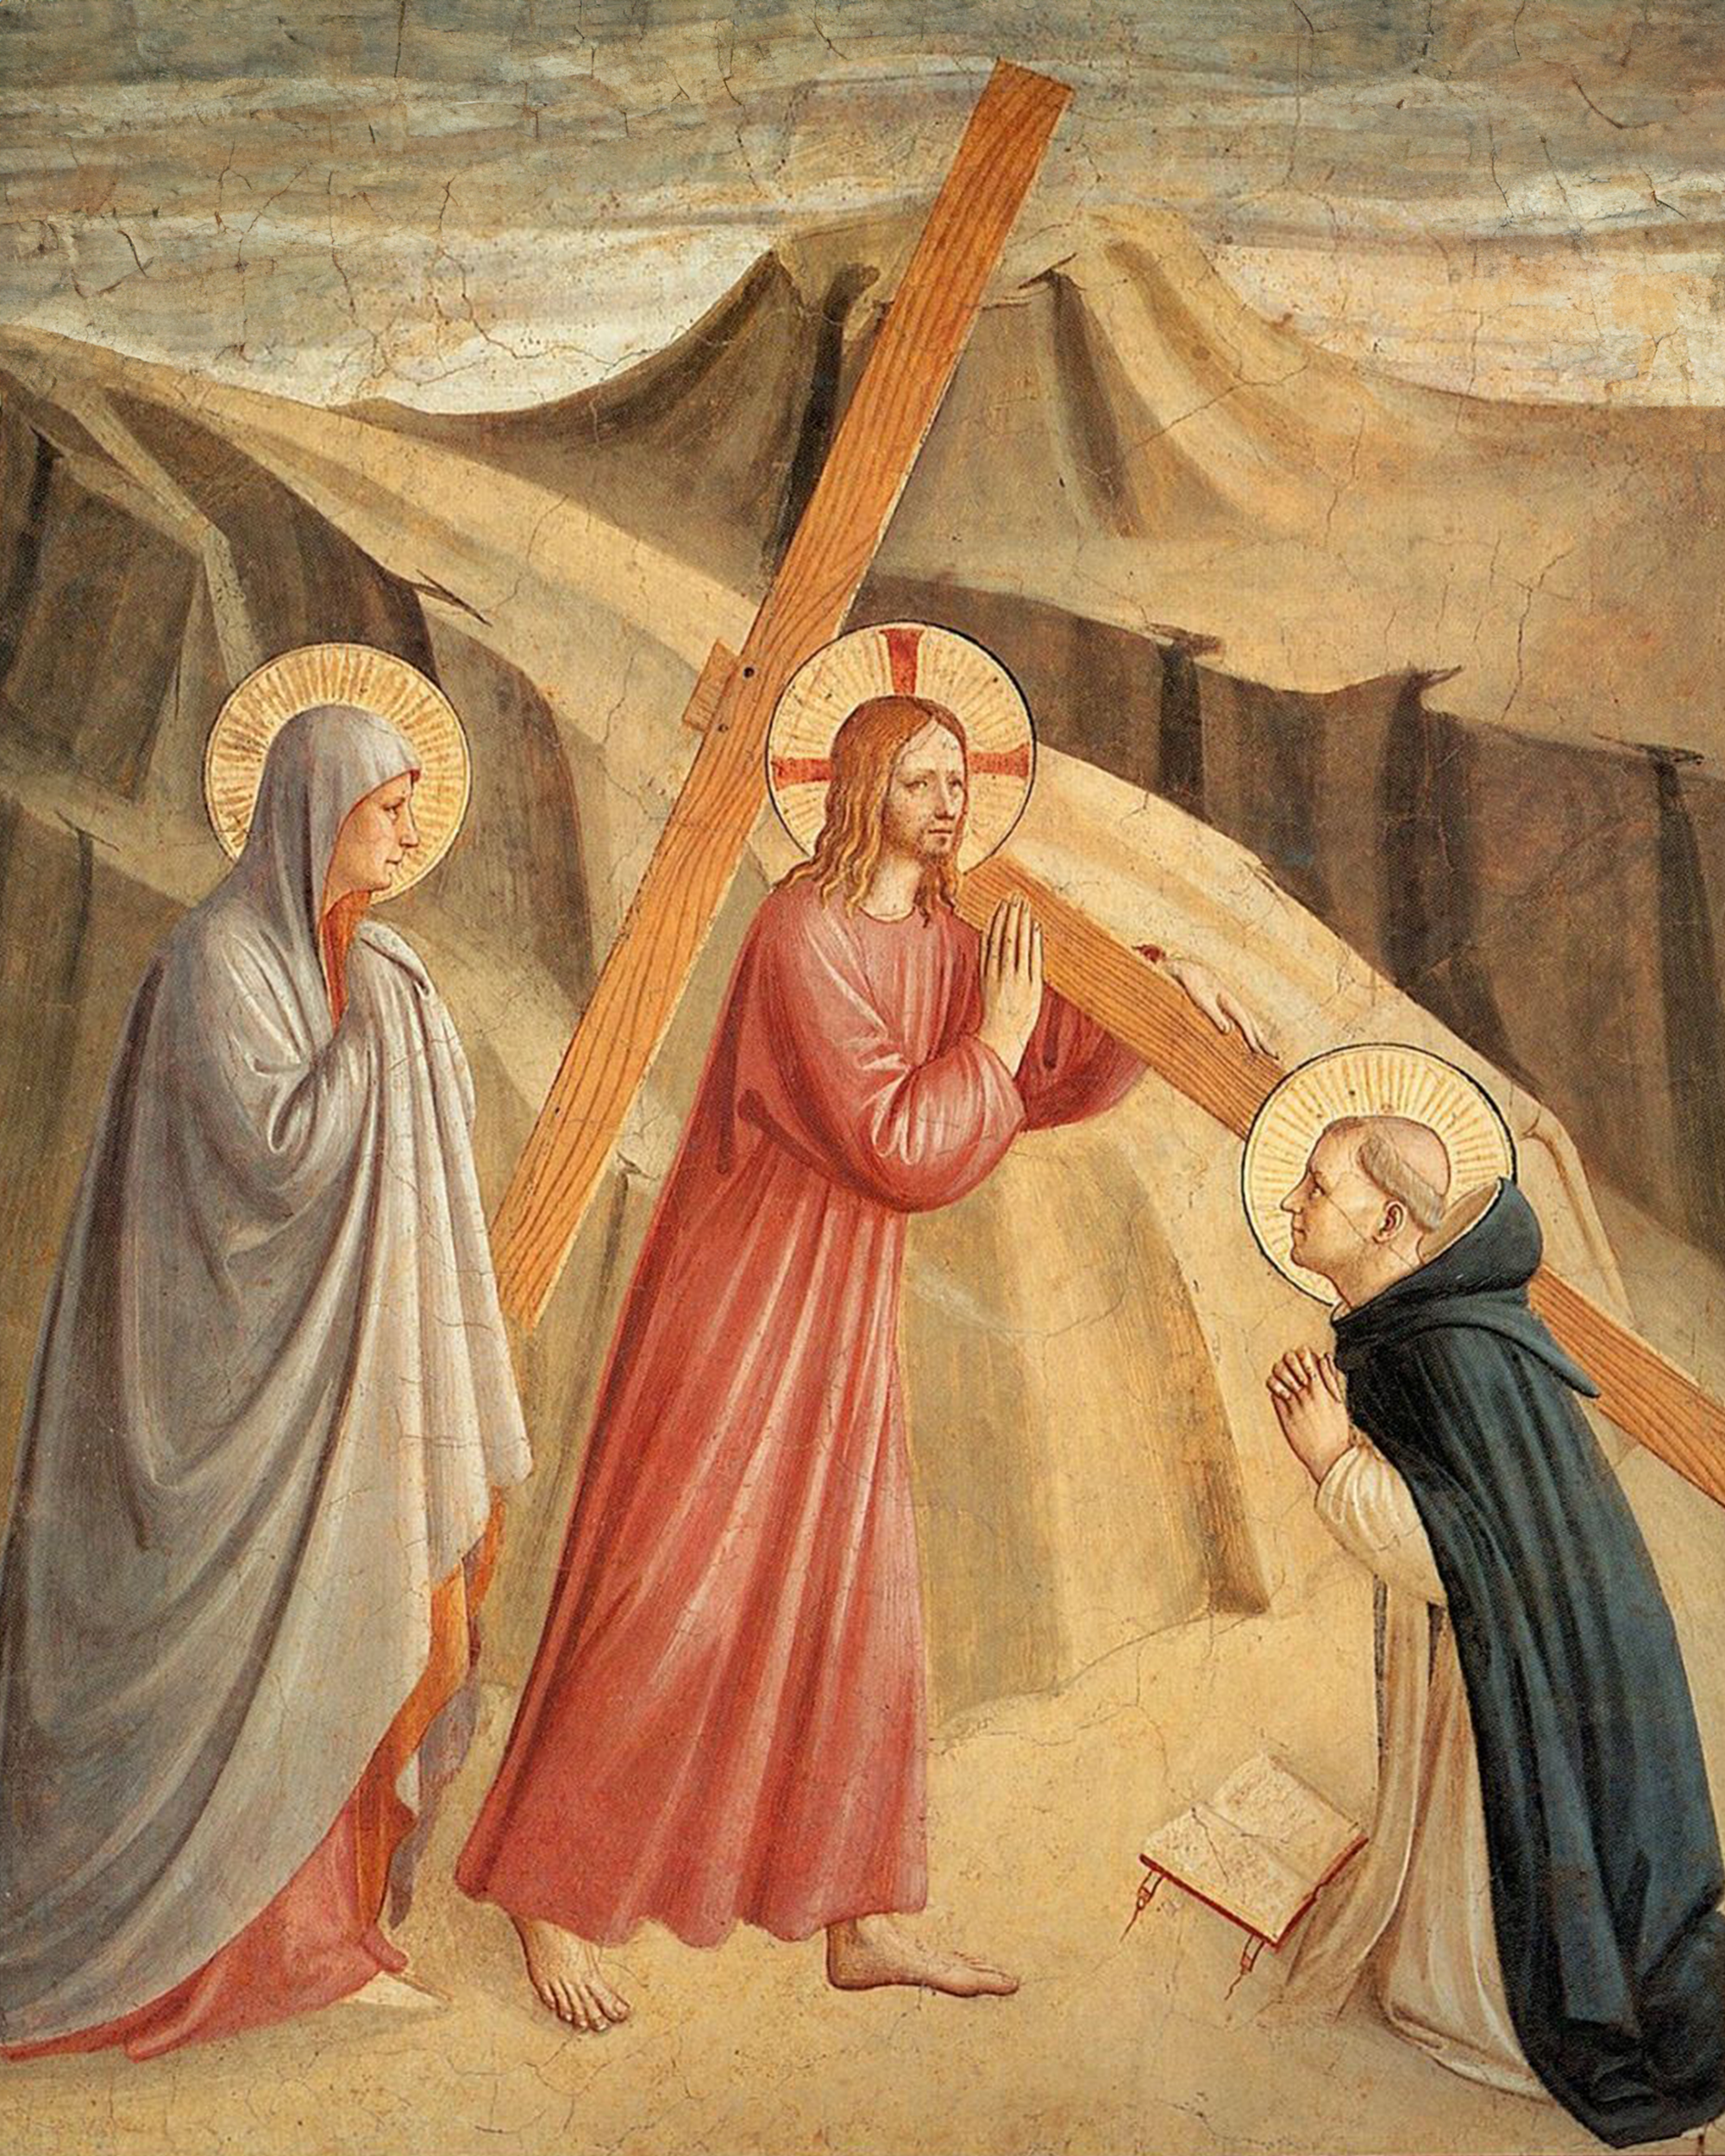 4. carrying of the cross